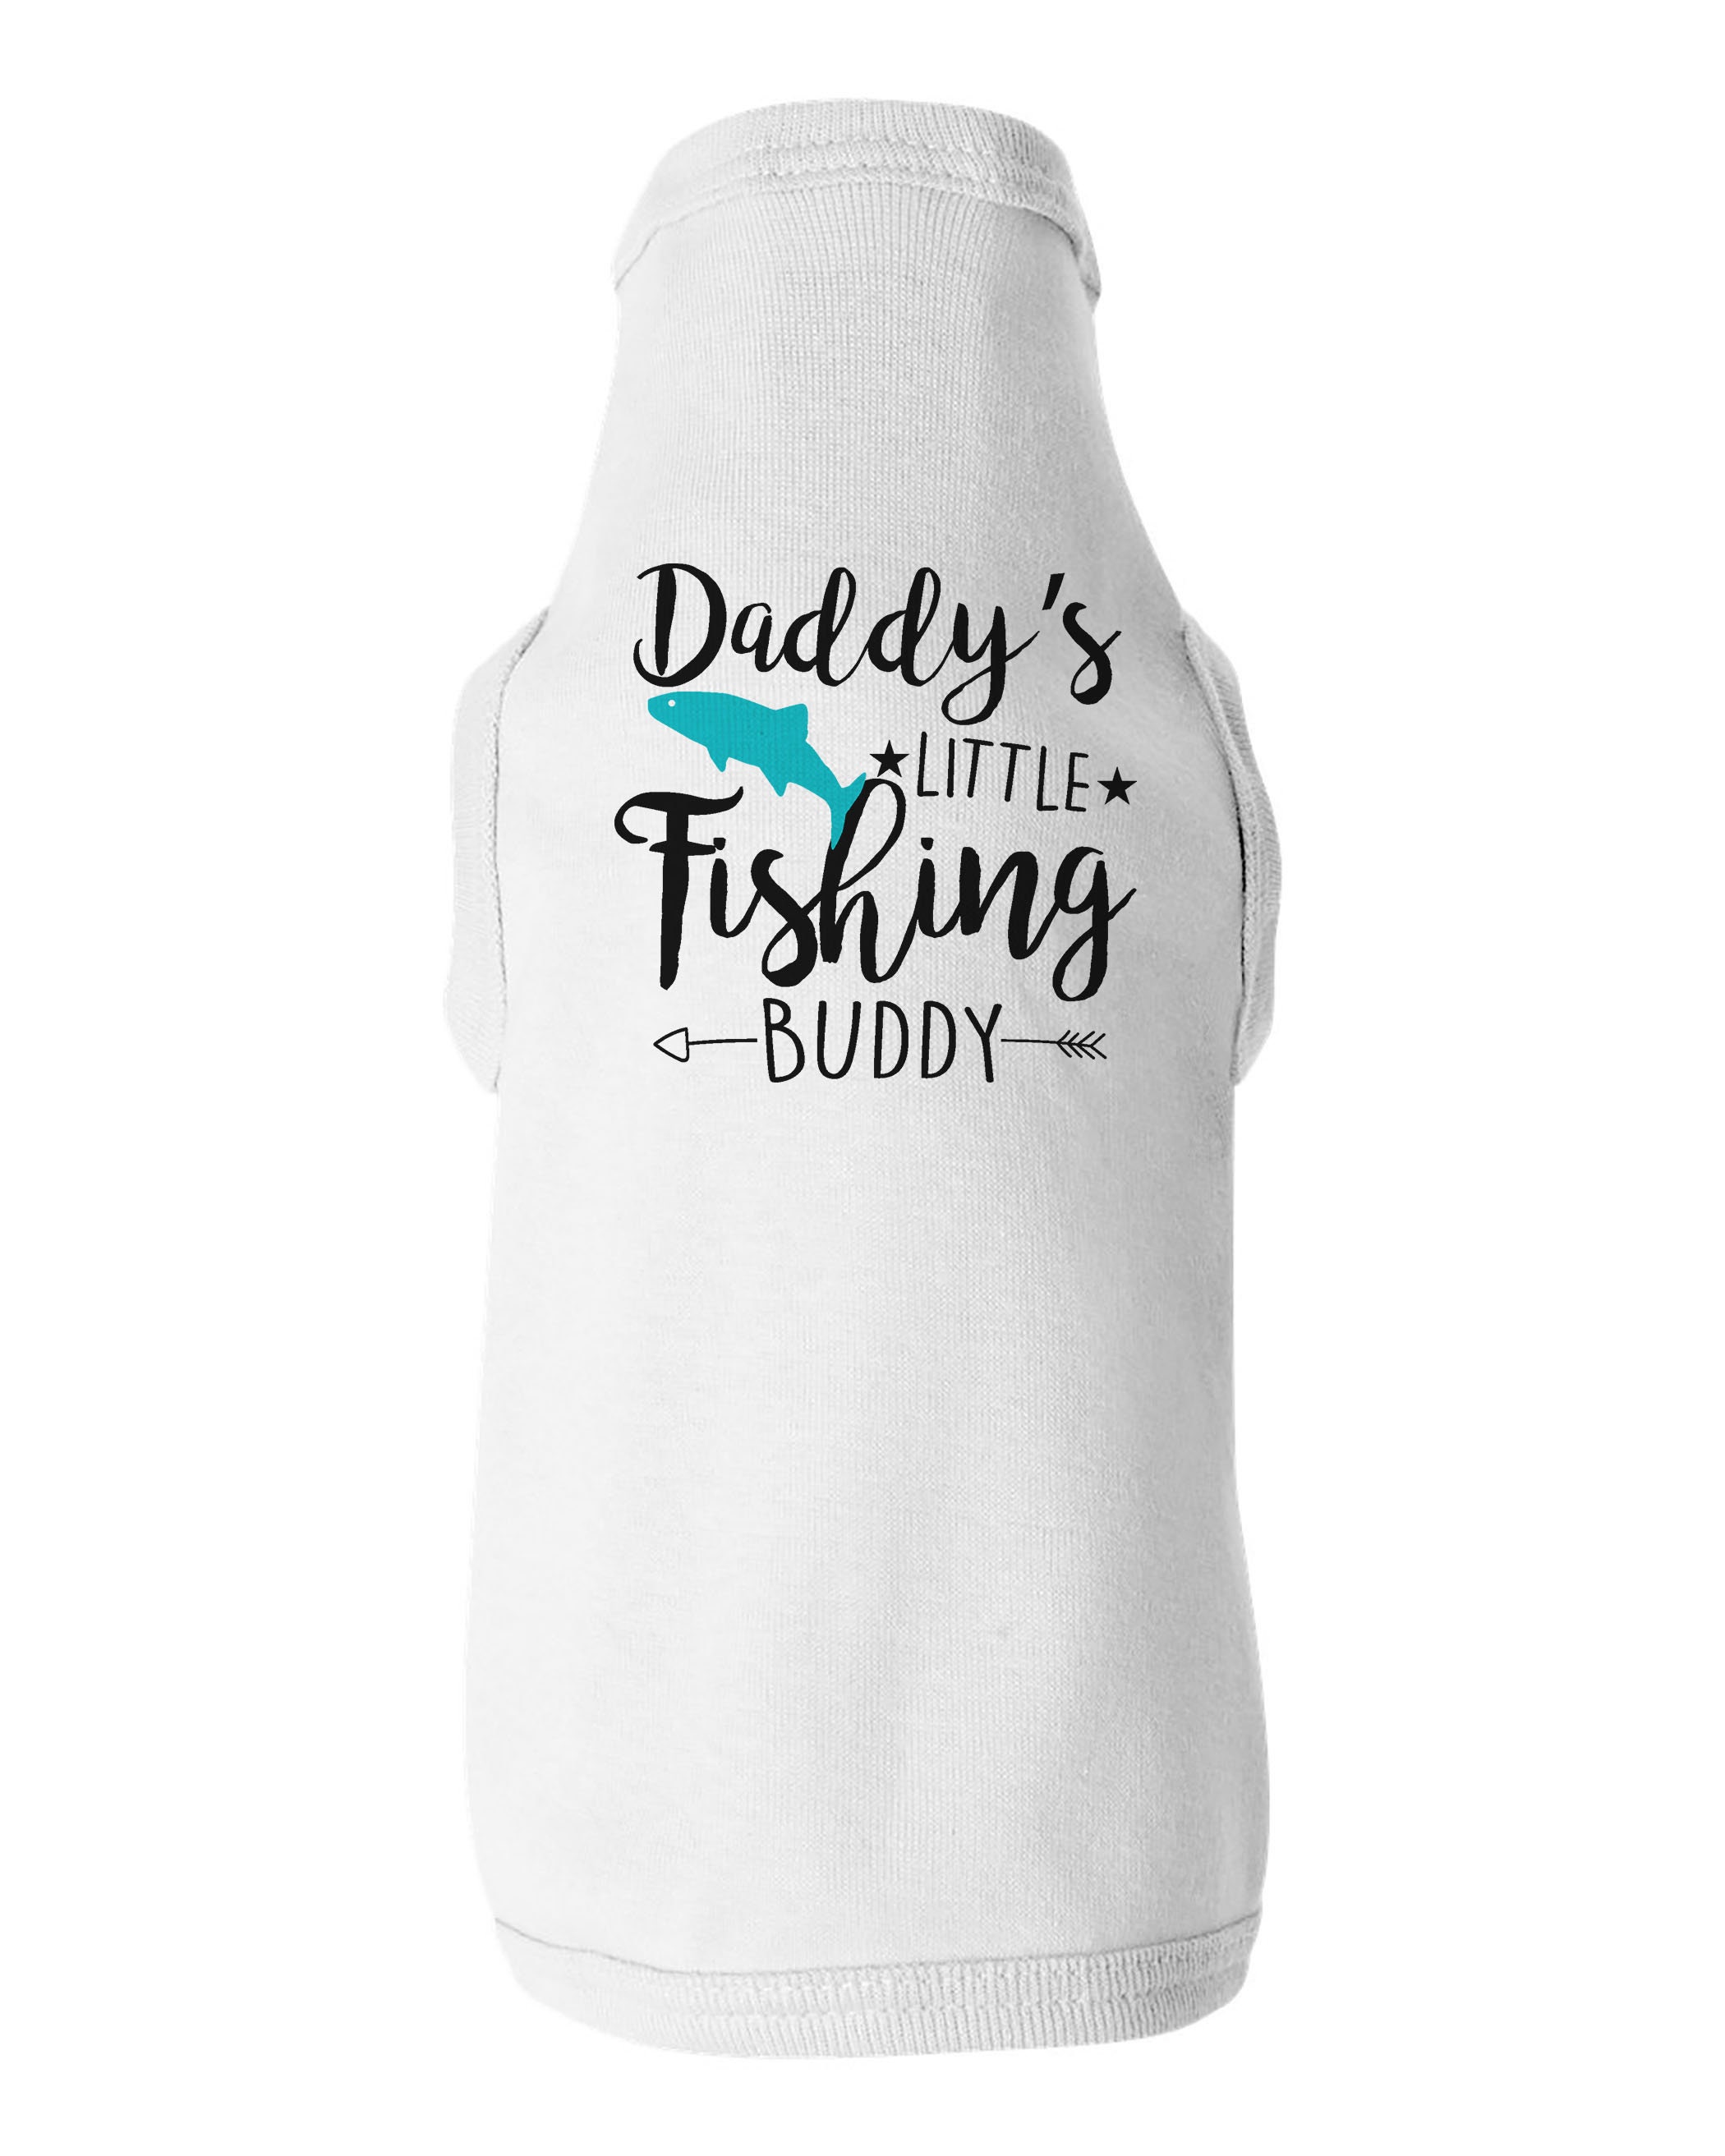 Daddys Fishing Buddy Outfit 